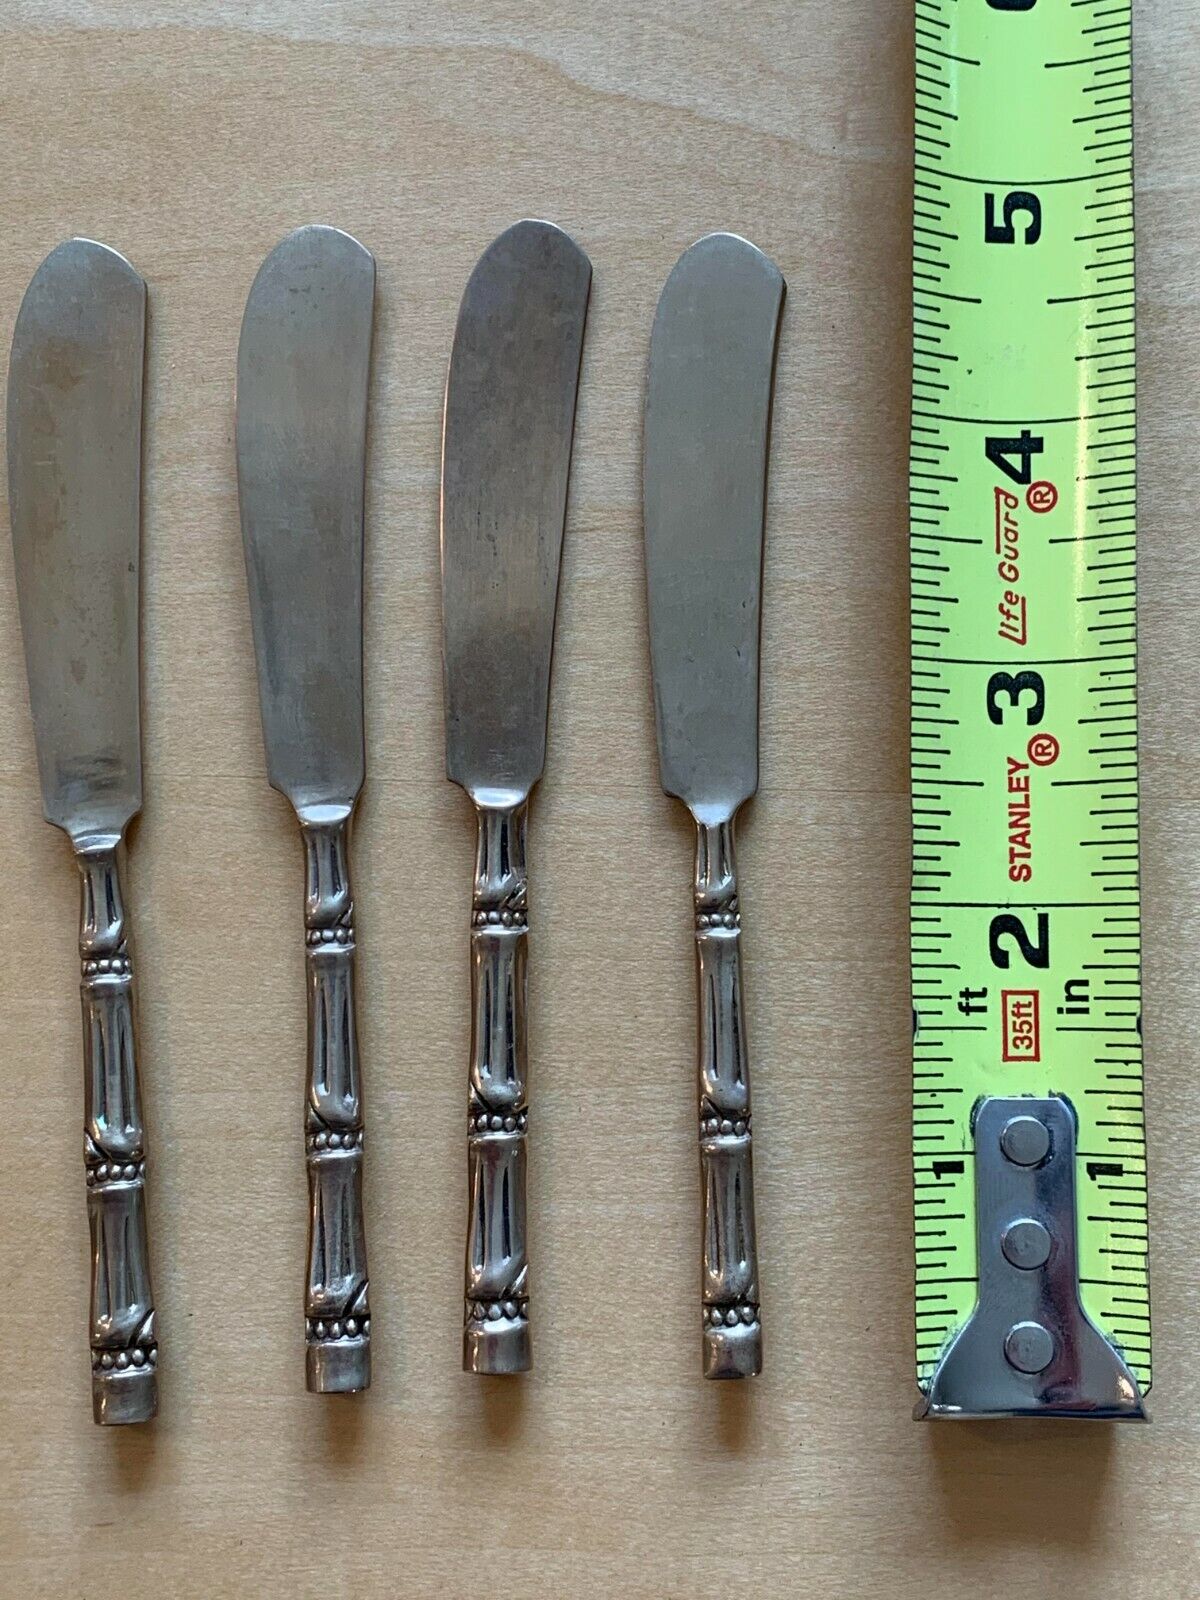 Antique Valuations: Bamboo handle brass-colored set of 4 butter spreaders, knives, vintage